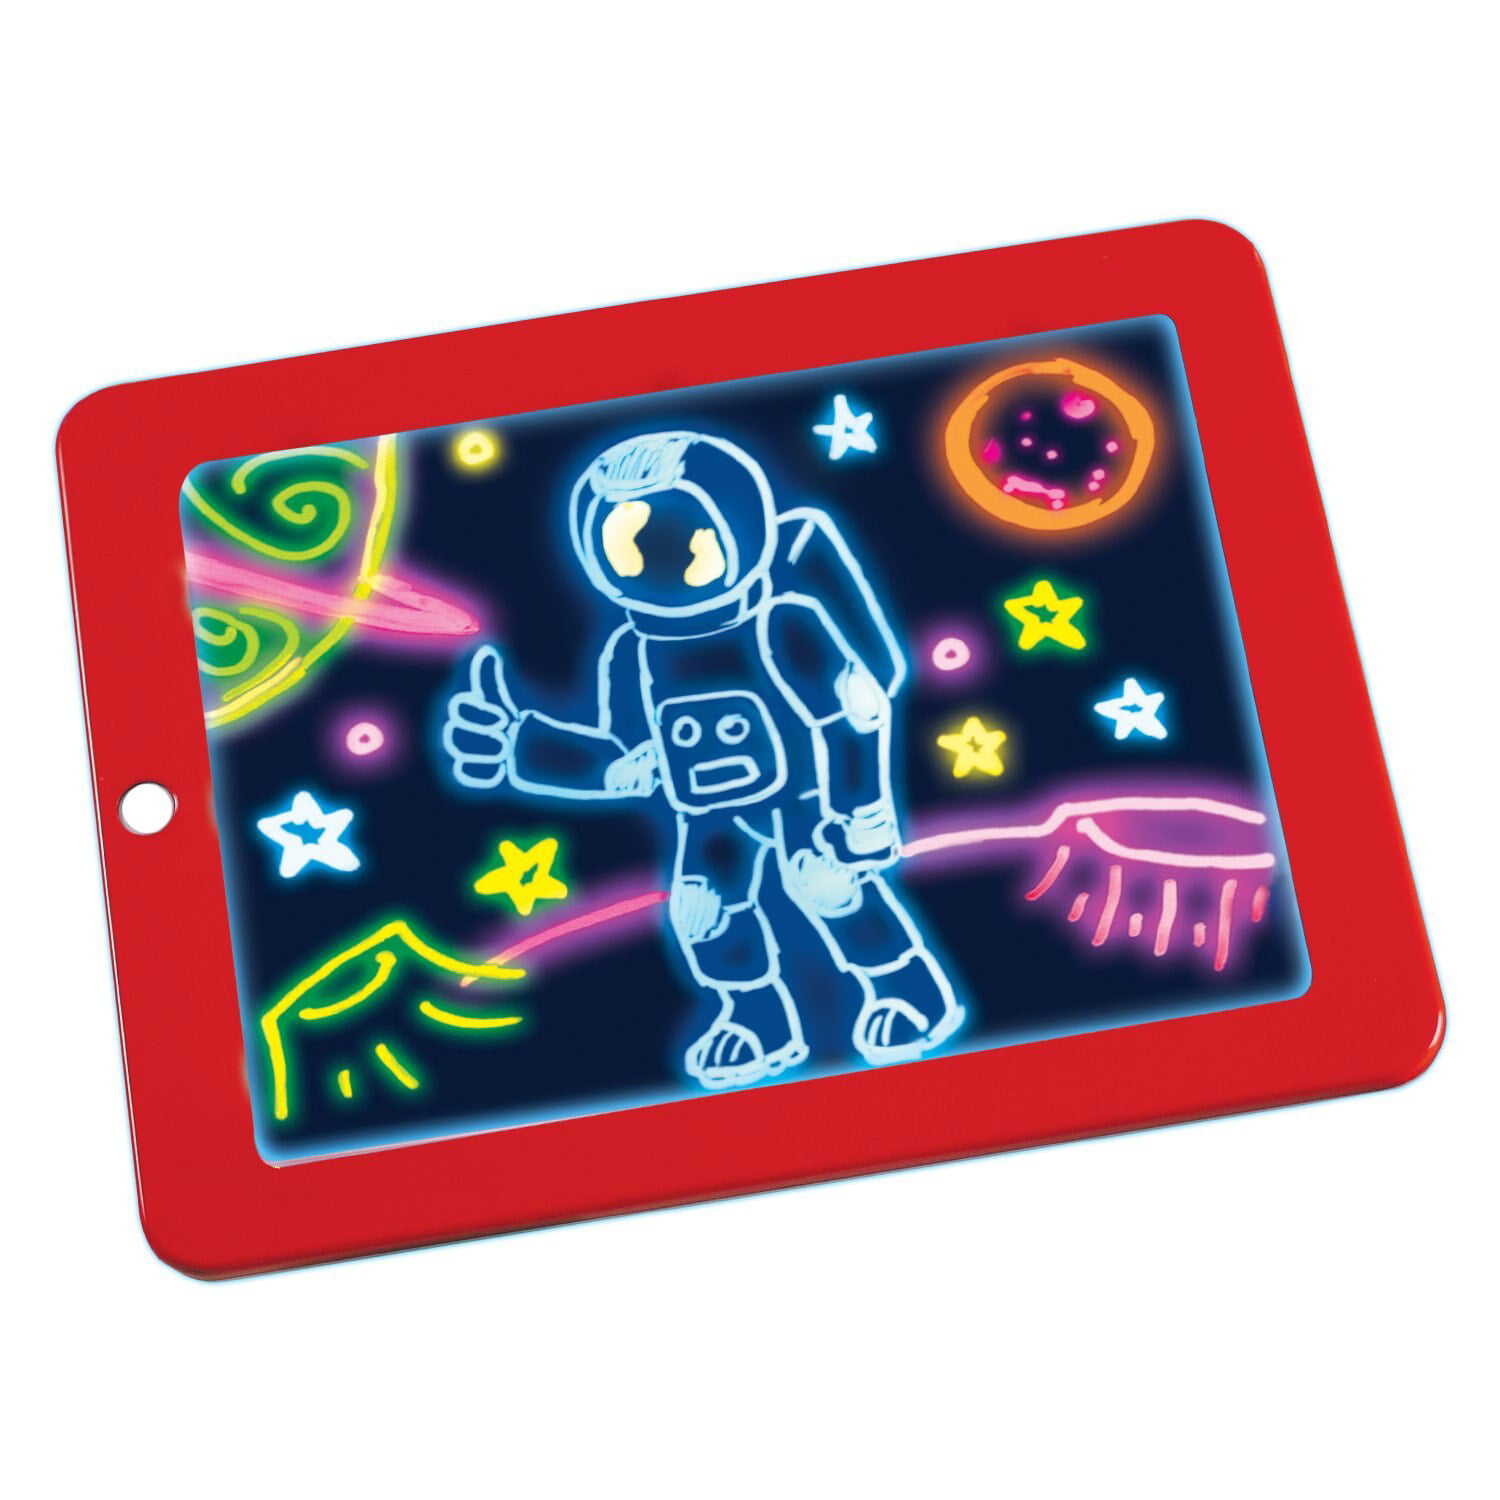 Blue Colorful Drawing Pad TIME4DEALS Reusable Erasable Writing Board Doodle Pad 10.5 Inch Larger Screen LCD Writing Tablet Doodle Board Electronic Color Board for Kids Toddlers Holiday Party Gifts 